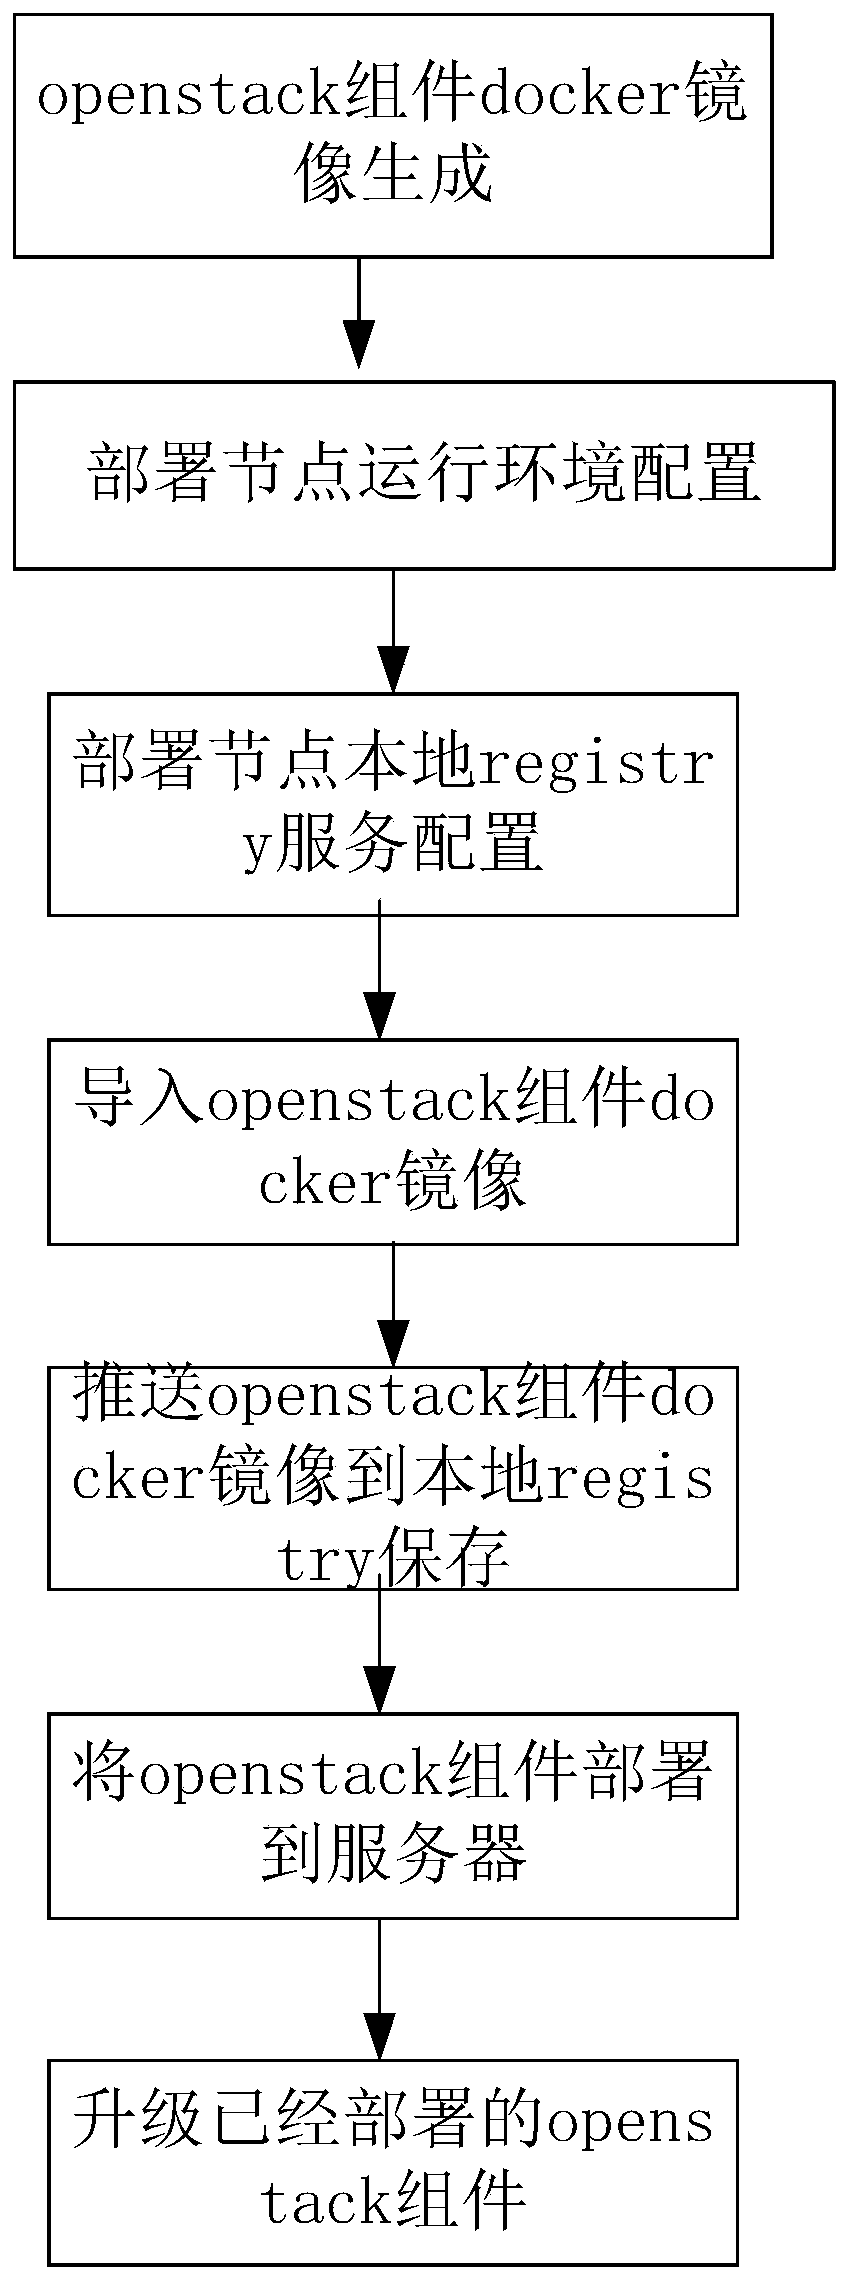 Construction method of openstack component containerization